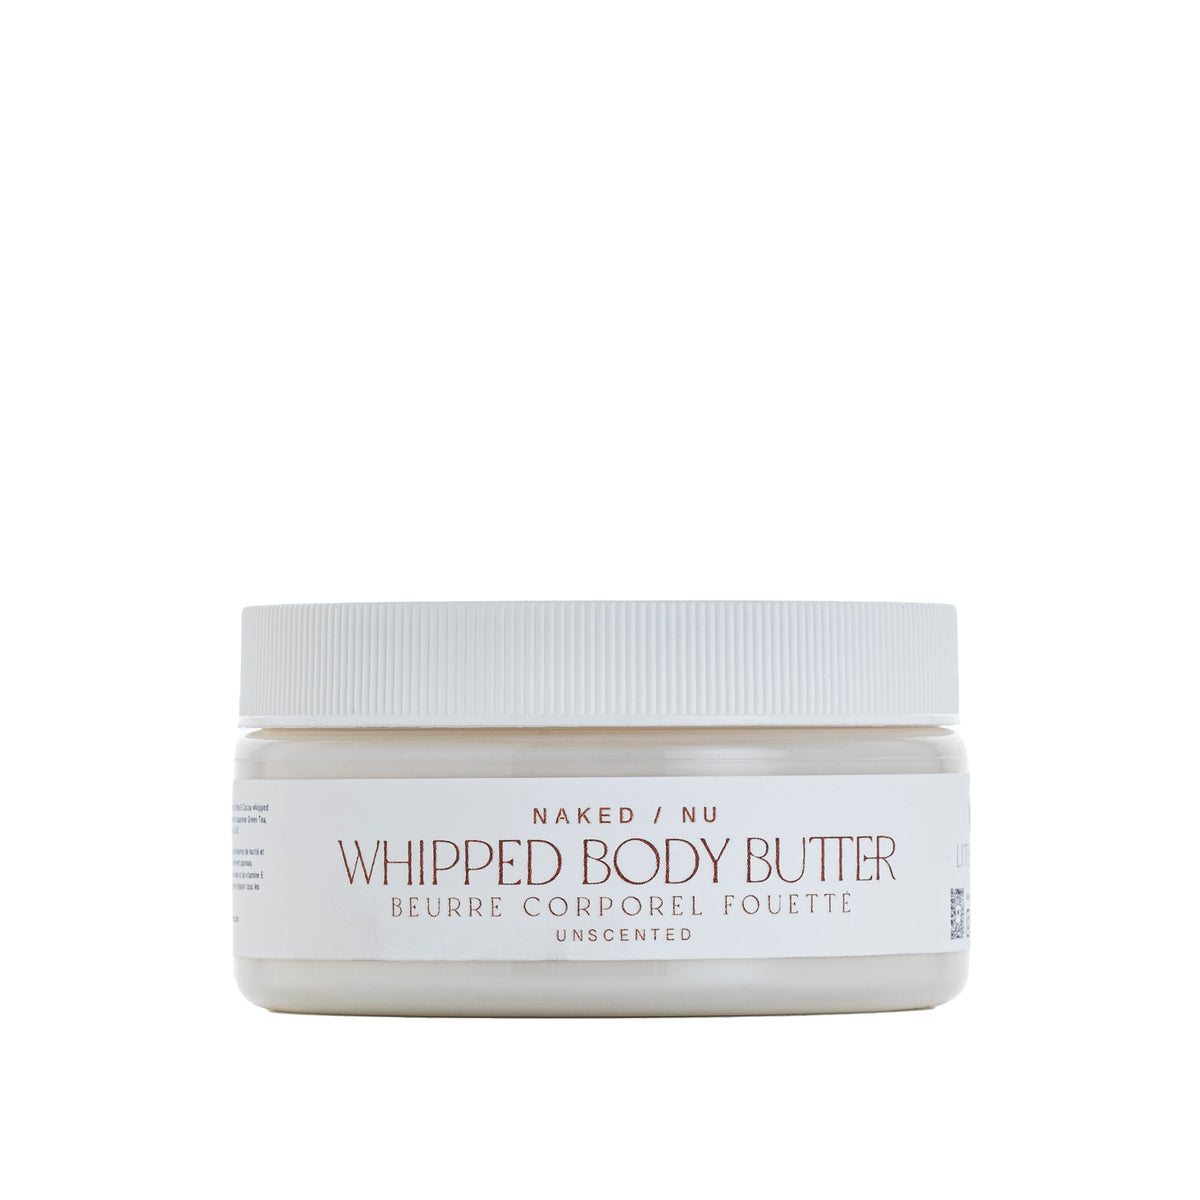 Whipped Body Butter - NAKED (fragrance-free)